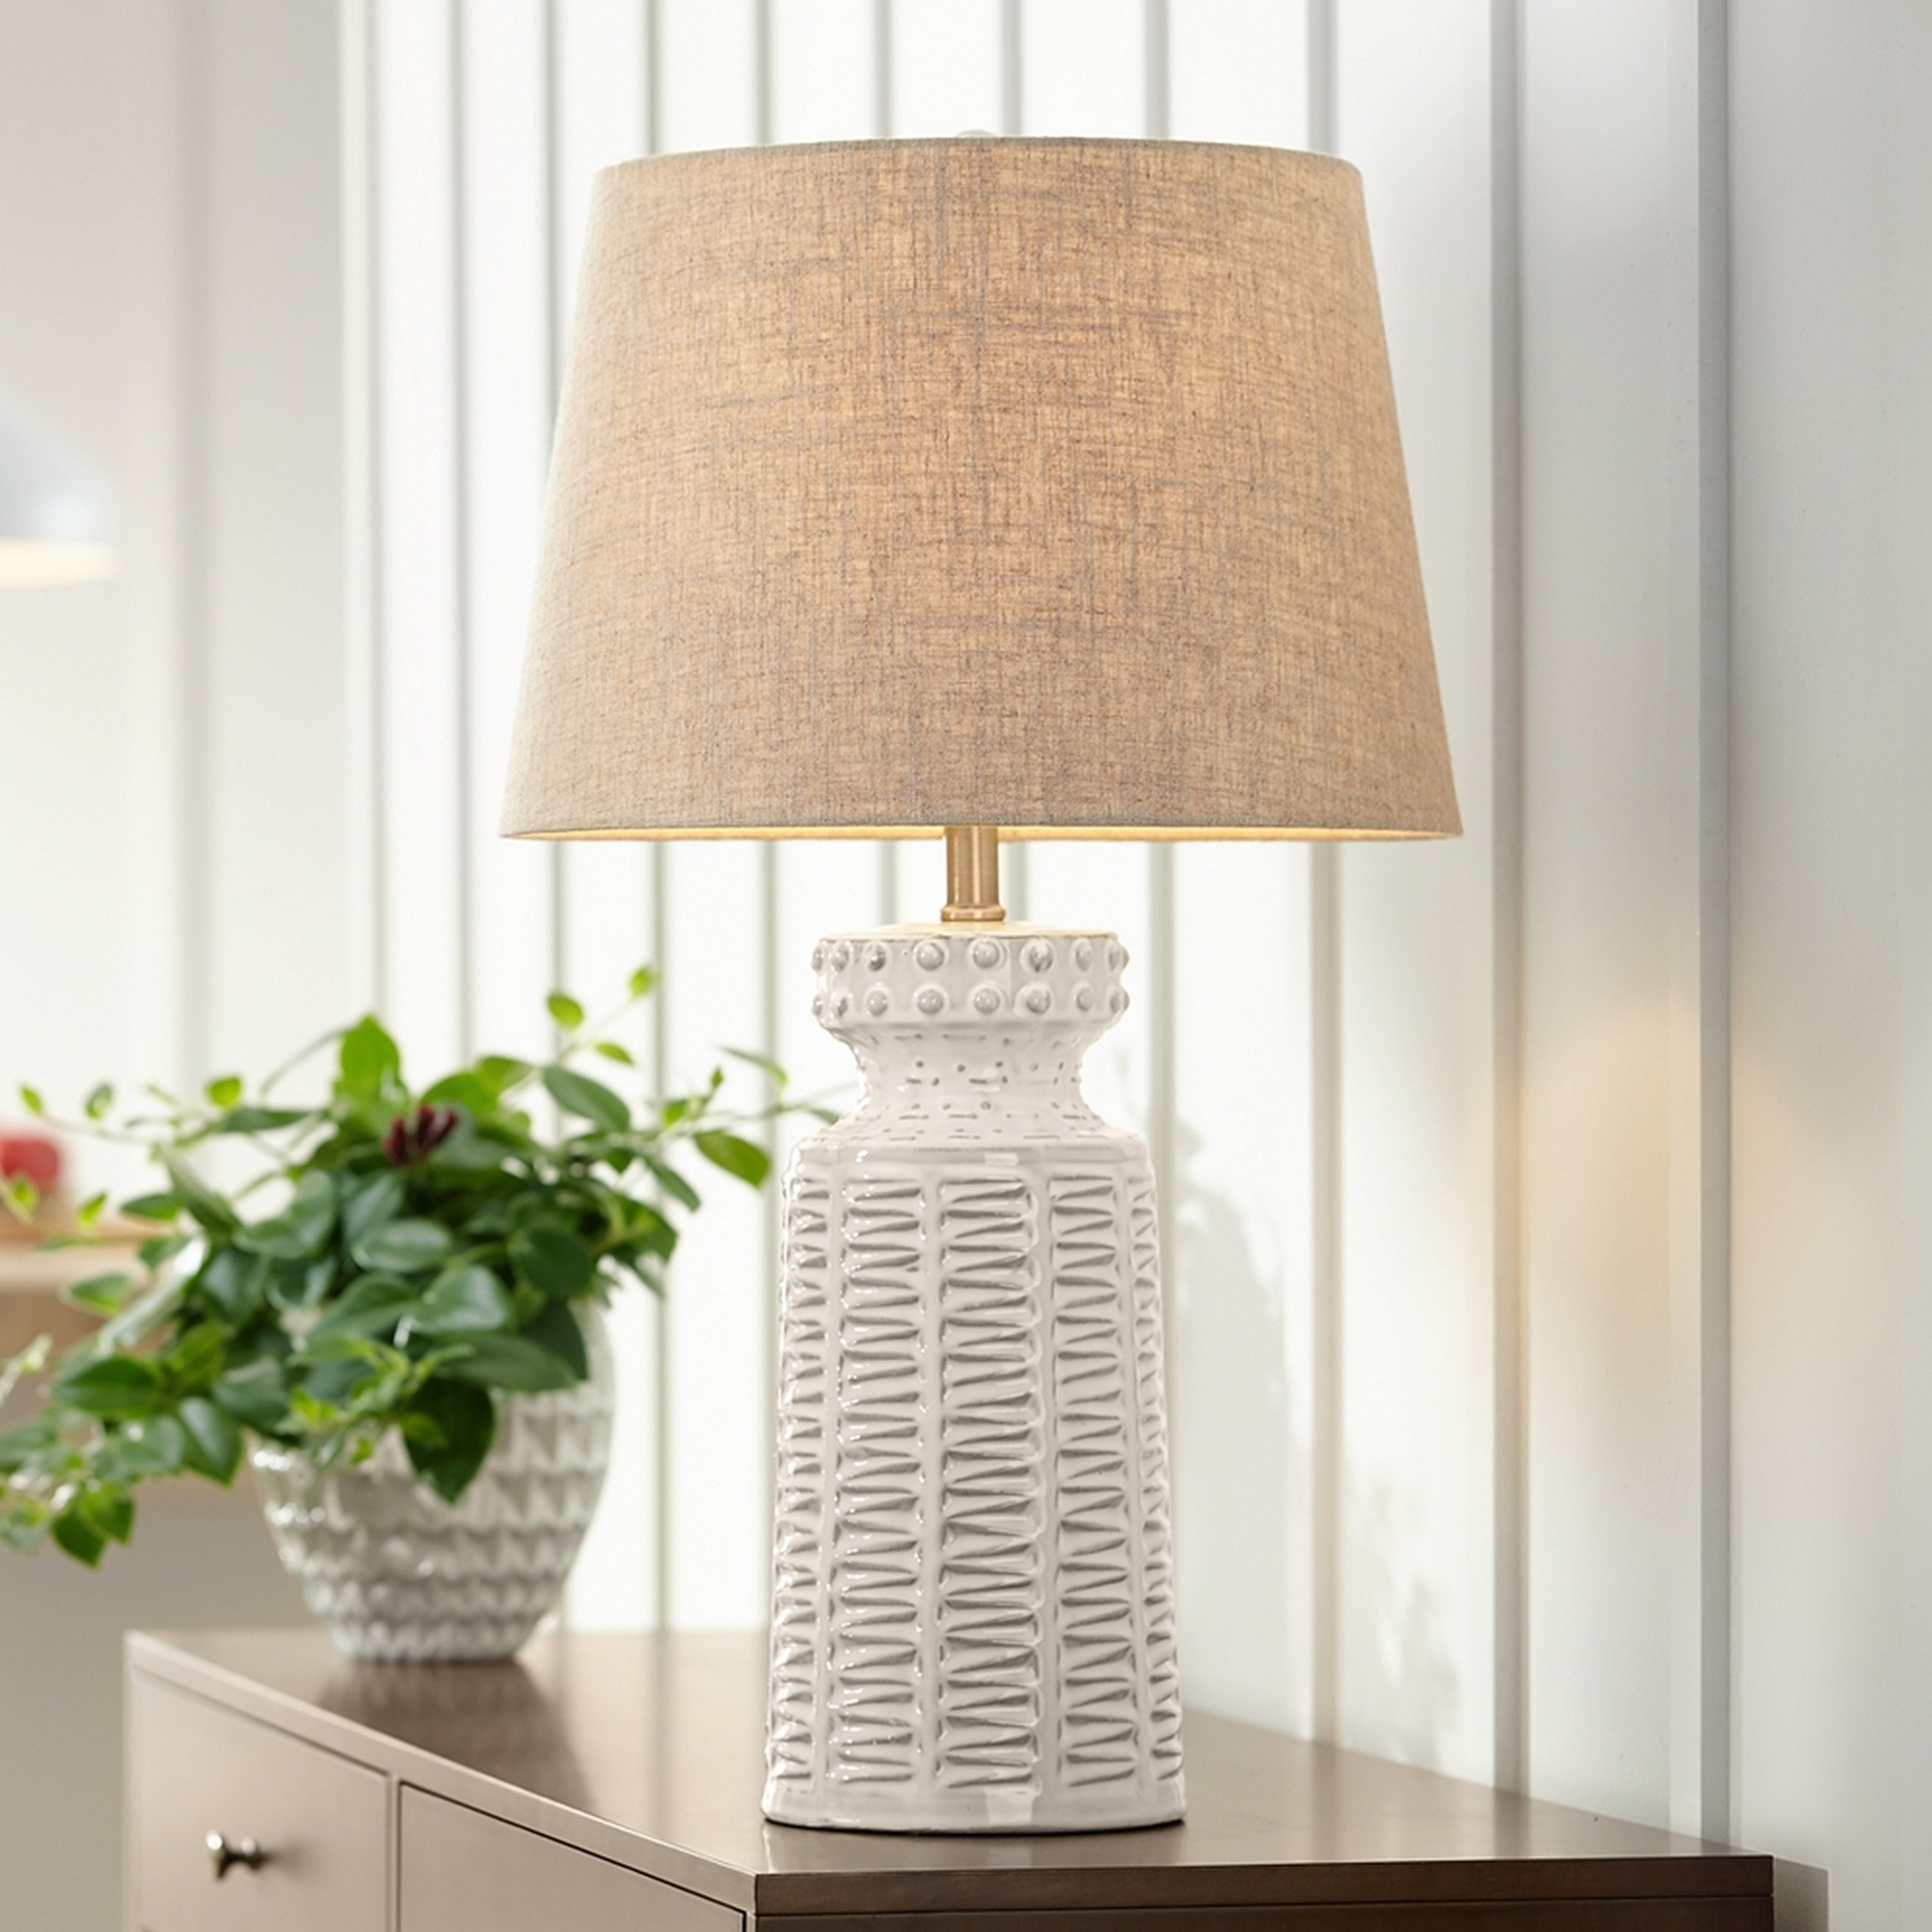 Helene Cream White Ceramic Table Lamp with Table Top Dimmer - Style # 89K50 - Lamps Plus